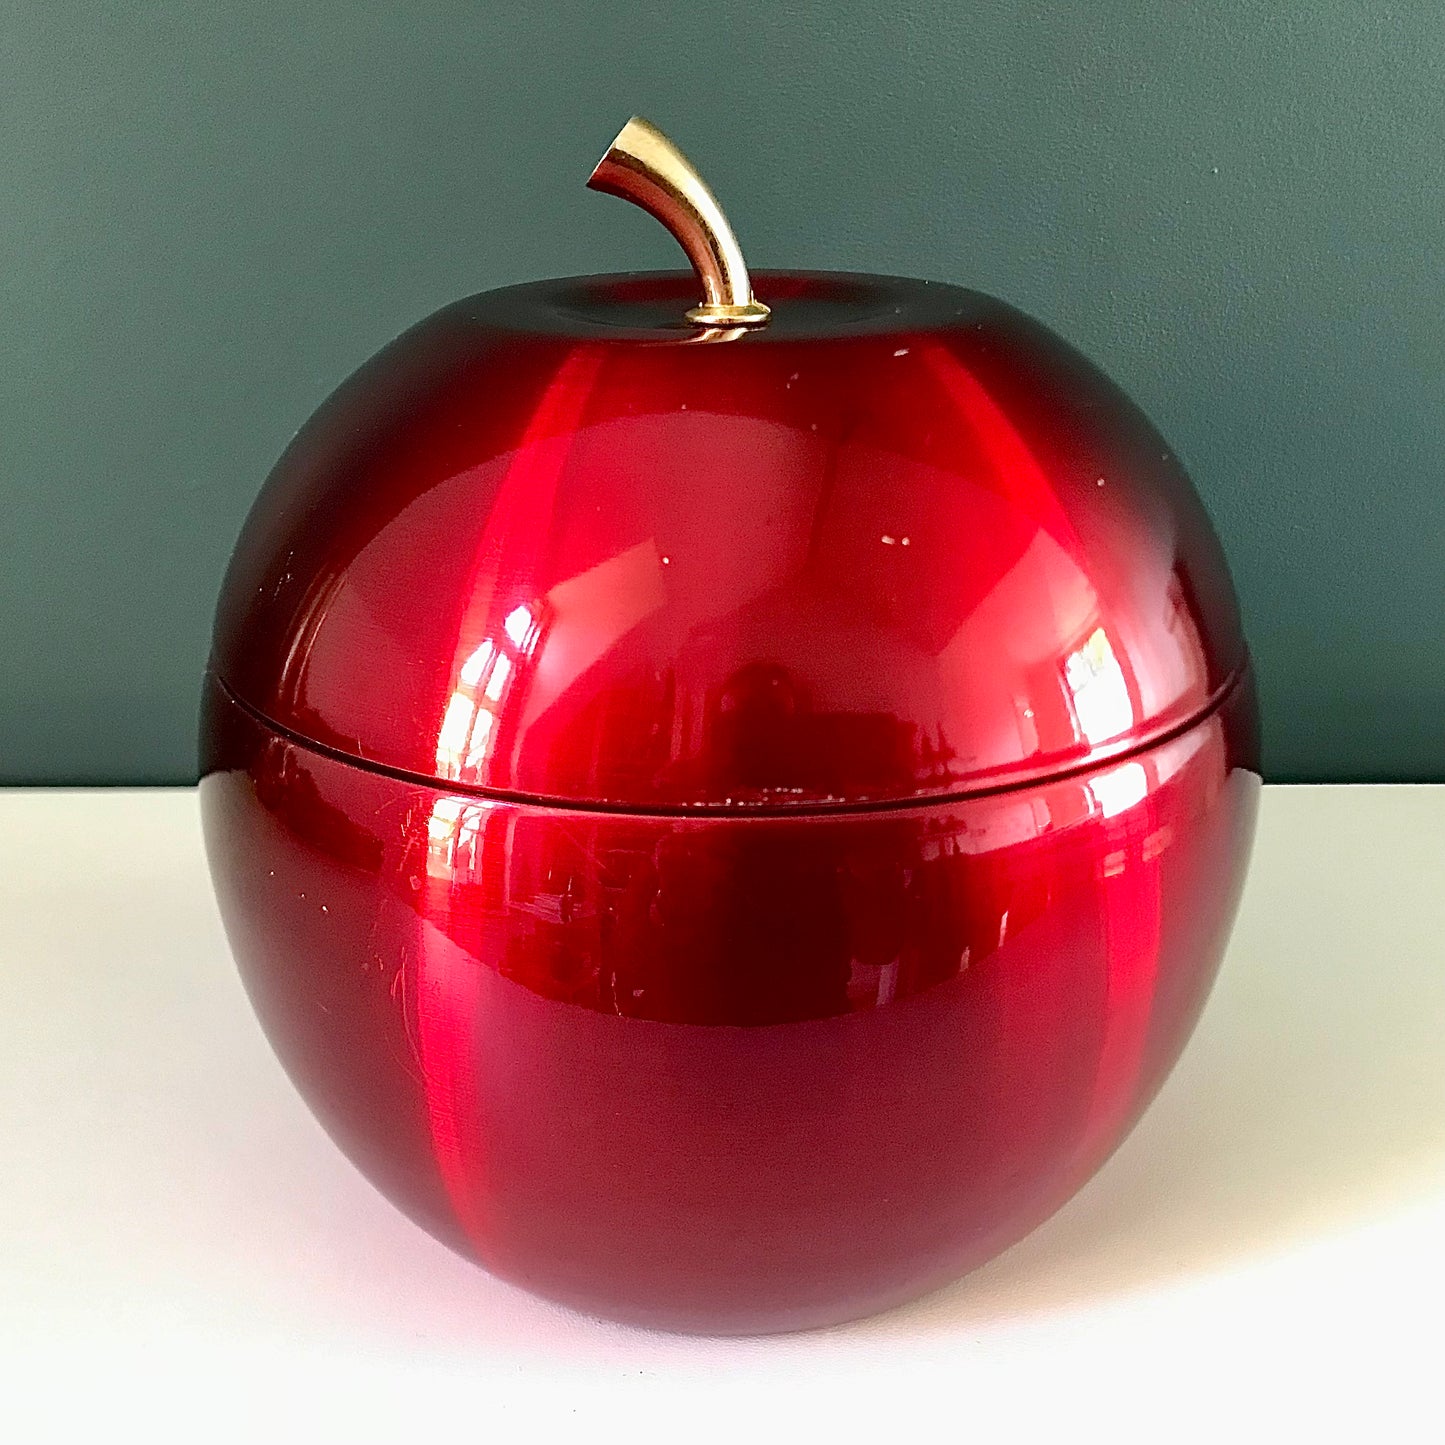 Daydream Australia Candy Apple Red Ice Bucket Kitsch 1960s Vintage Retro Barware Atomic Mens Fathers Gifts Presents